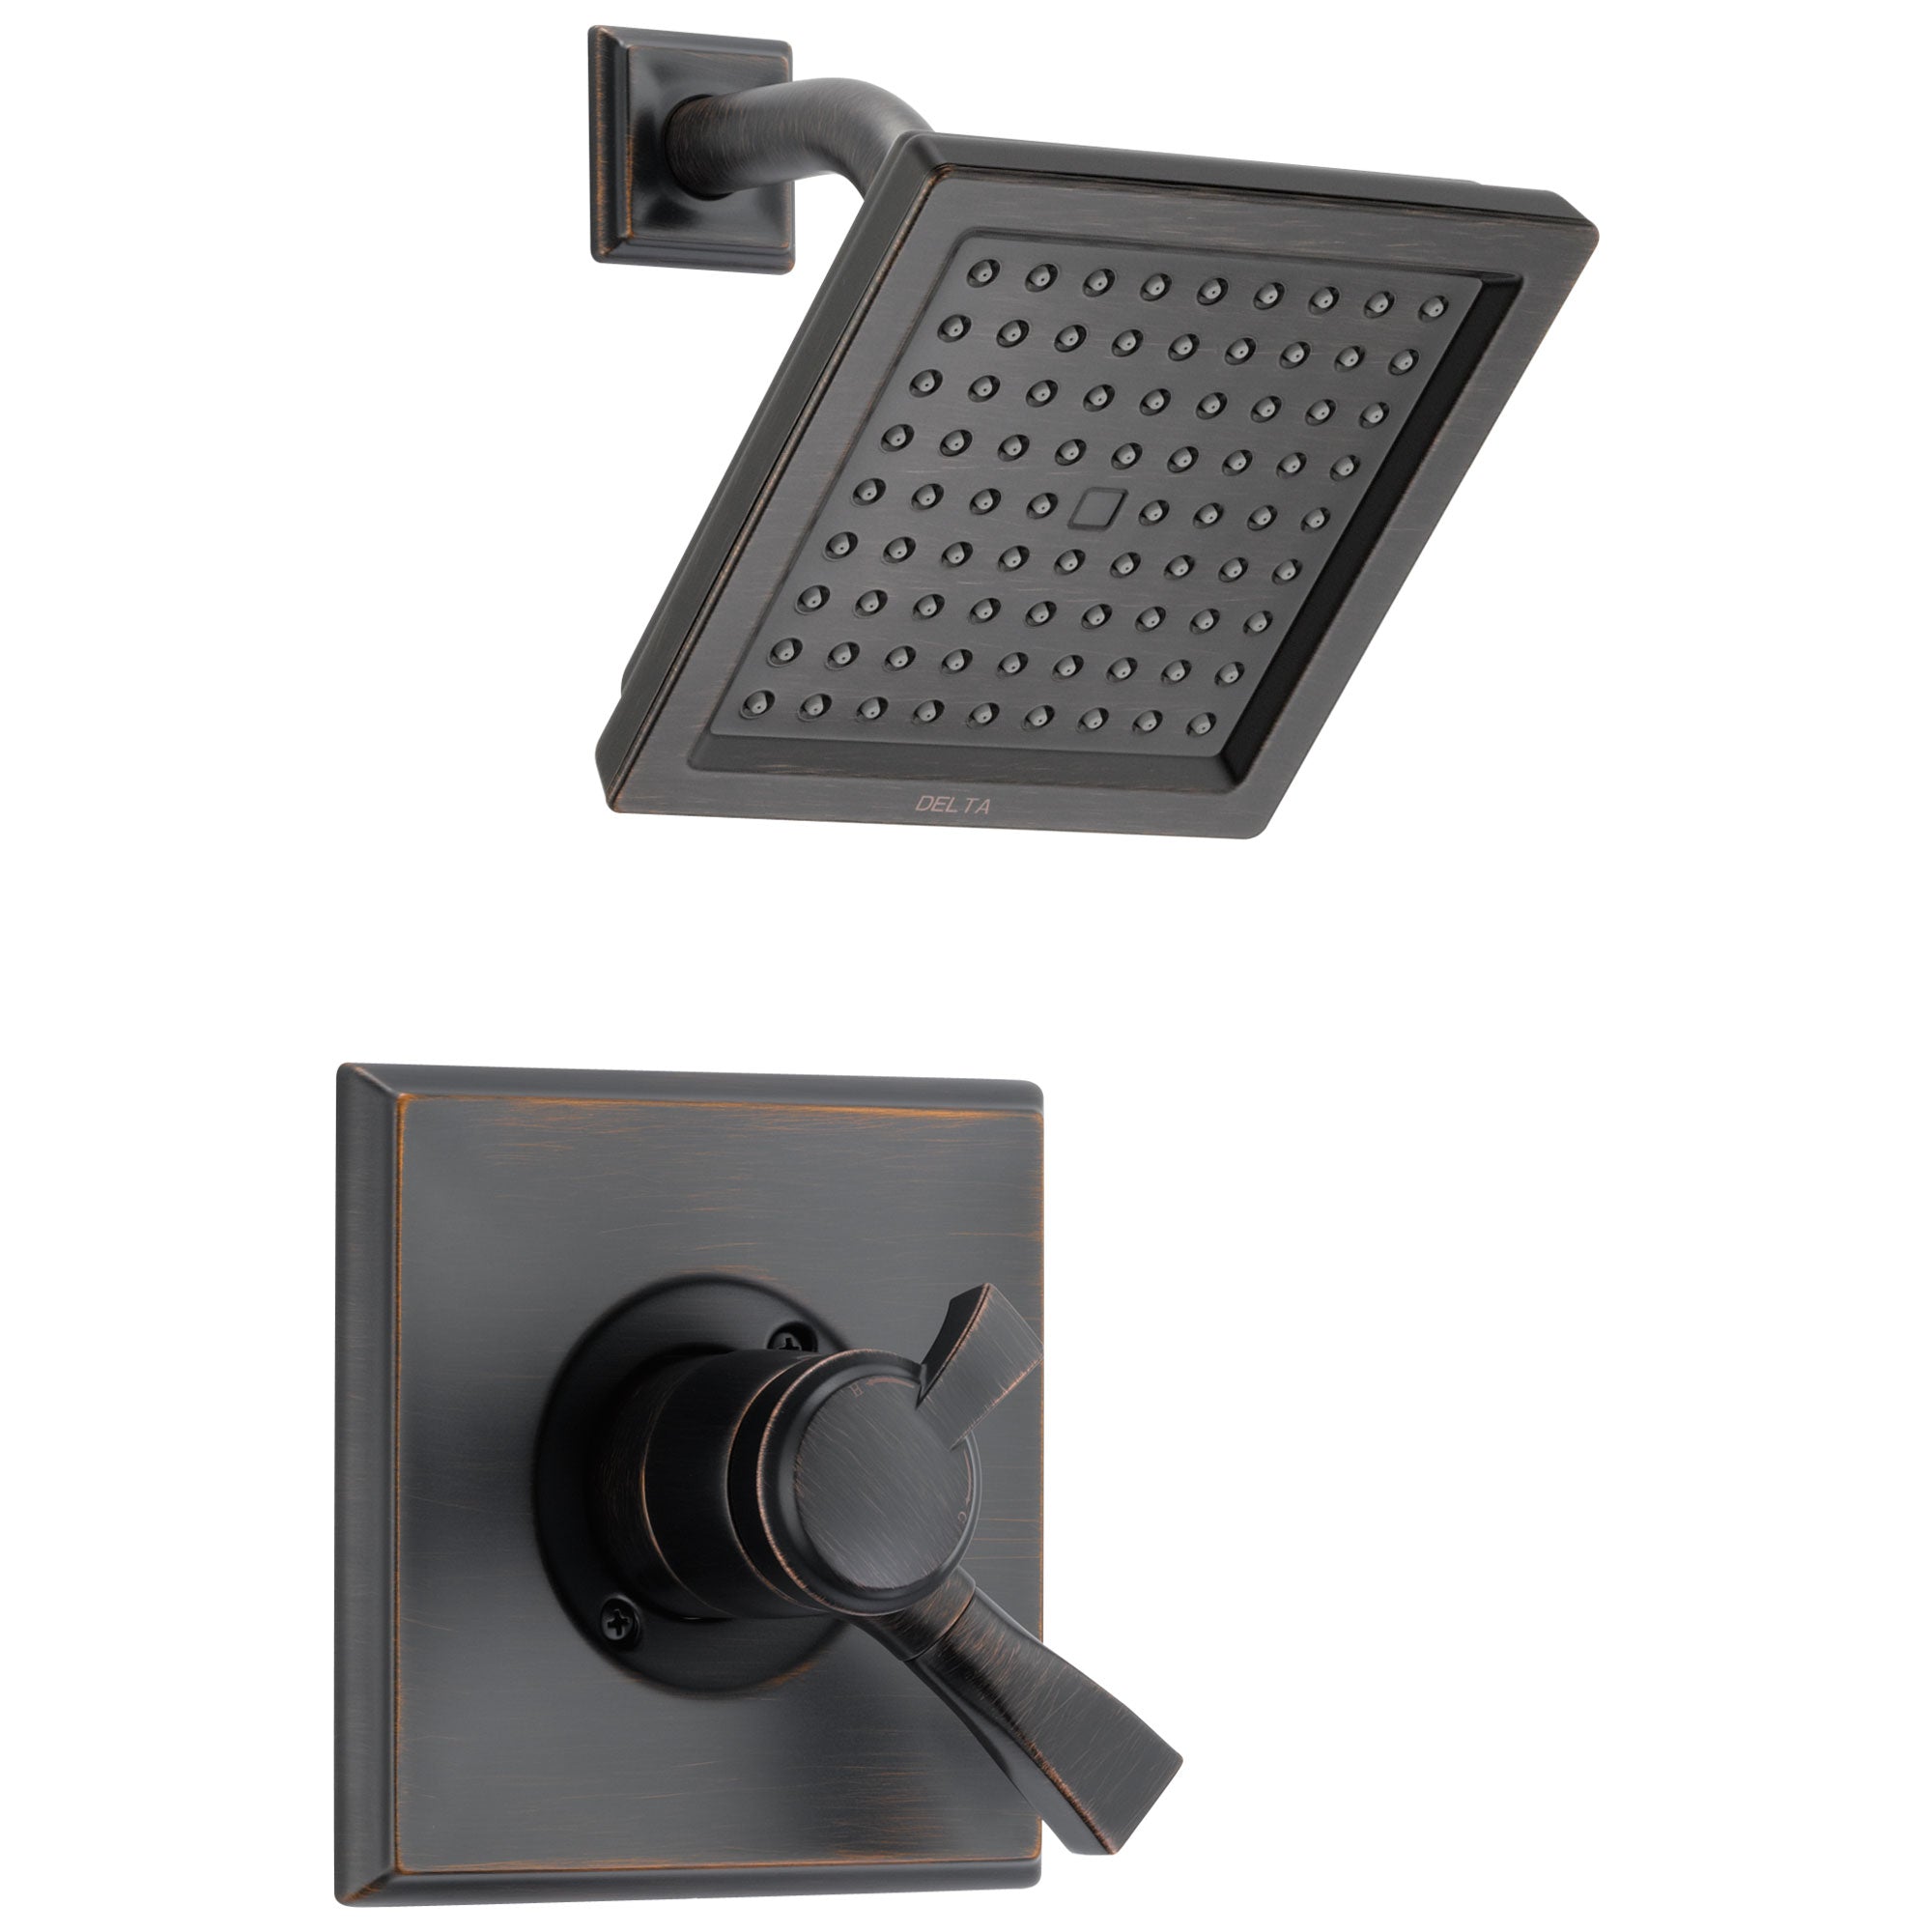 Delta Dryden Venetian Bronze Finish Monitor 17 Series Water Efficient Shower only Faucet Includes Handles, Cartridge, and Valve without Stops D3387V